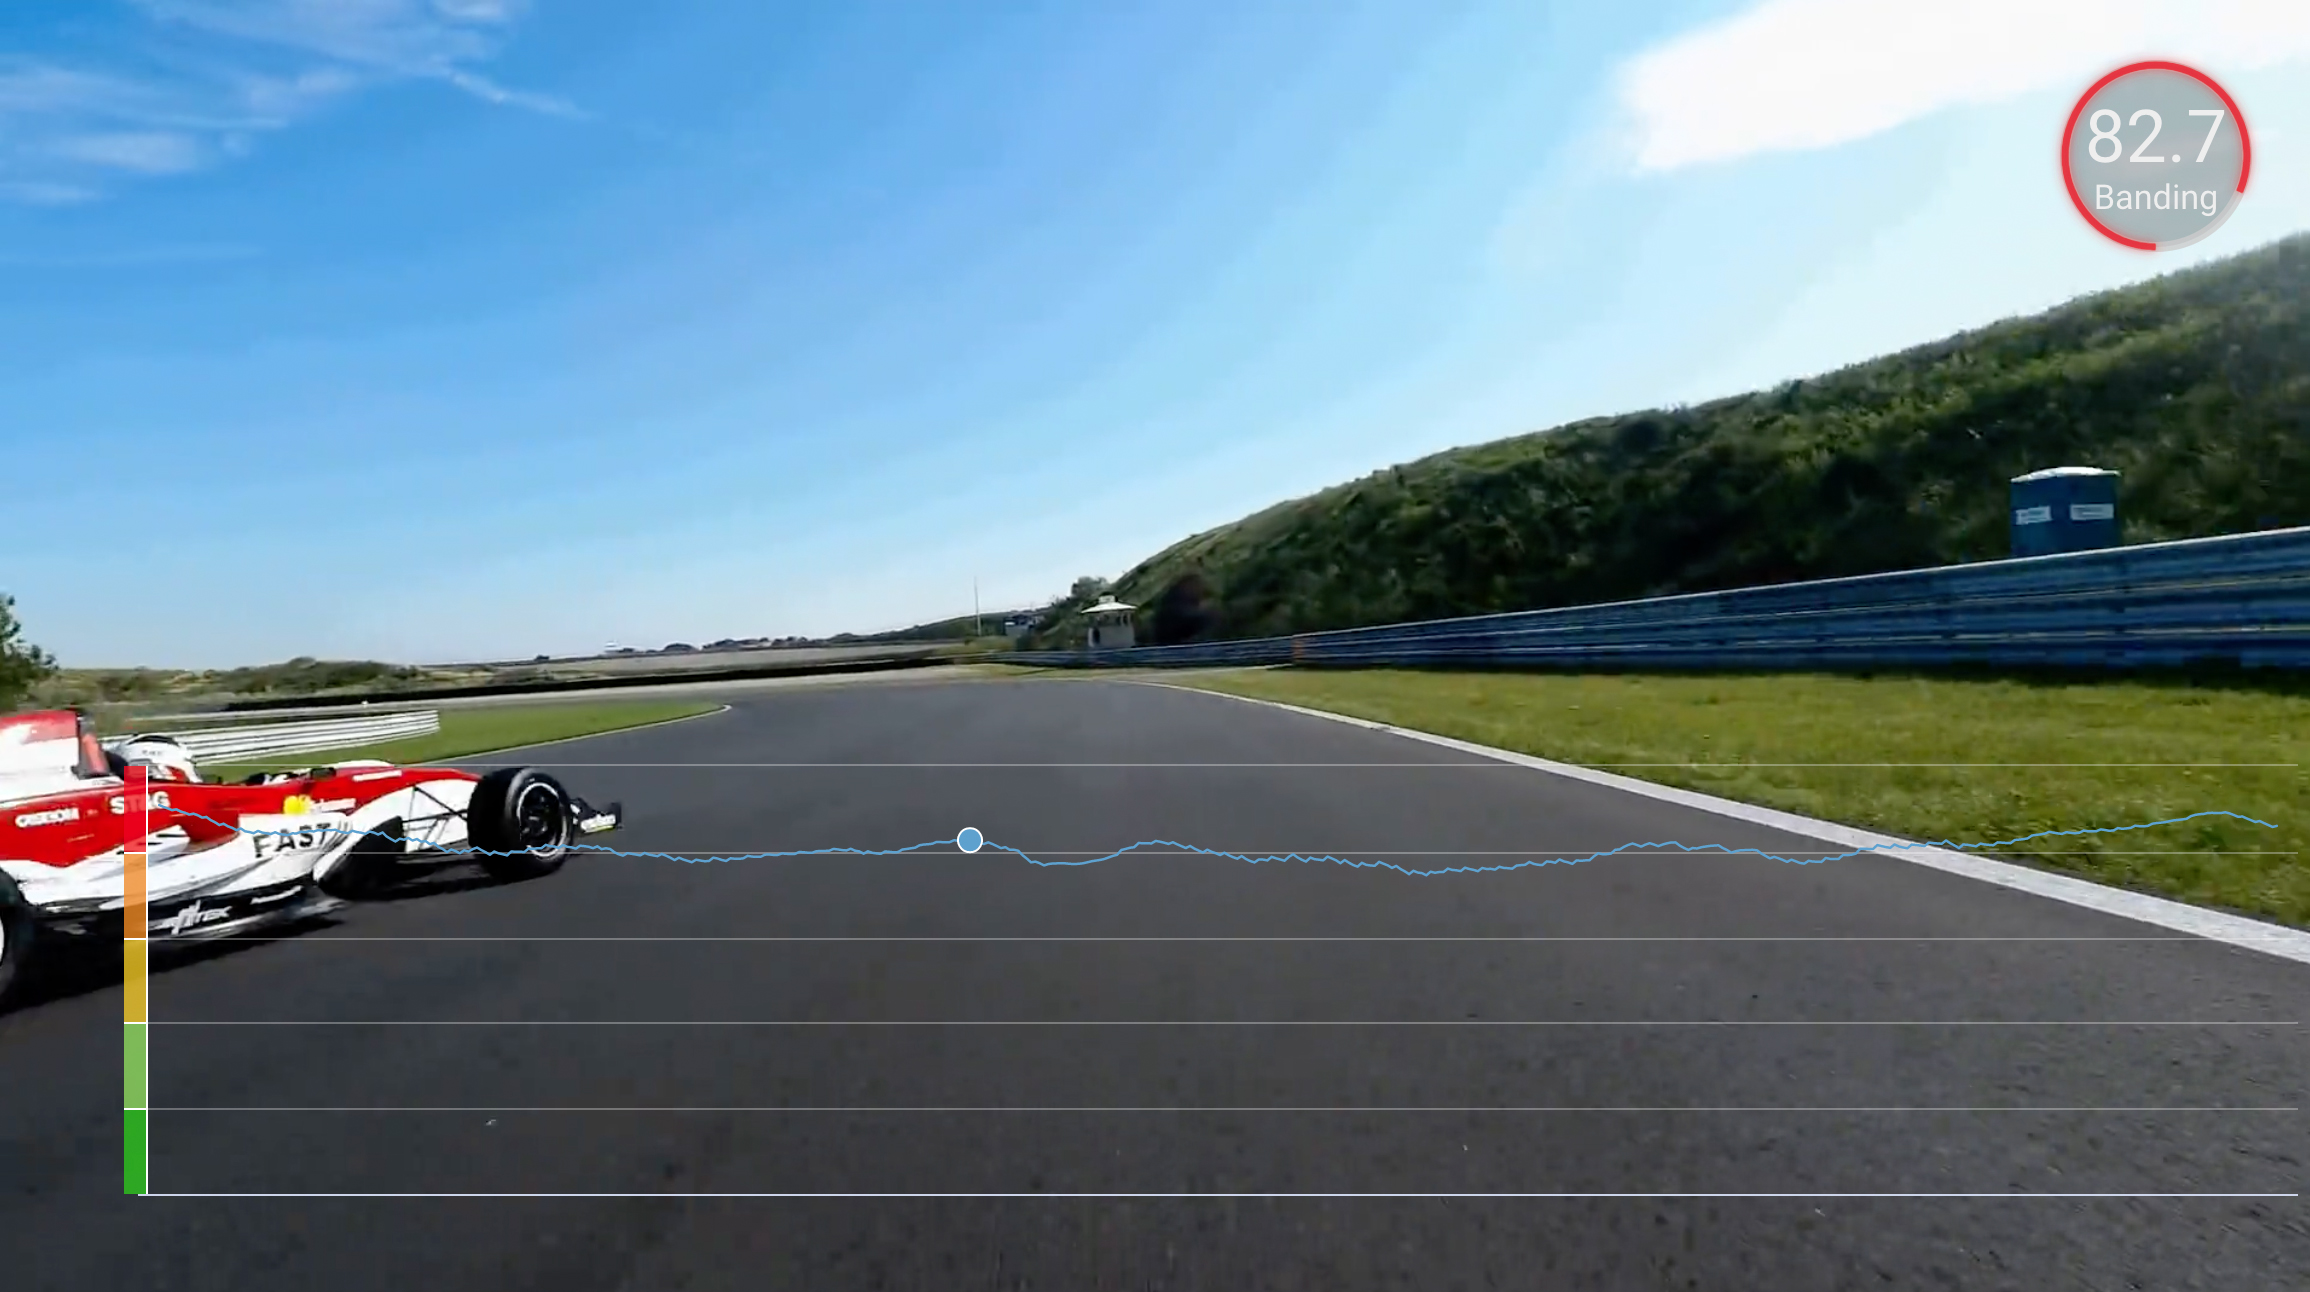 Banding detection with a race car on a track